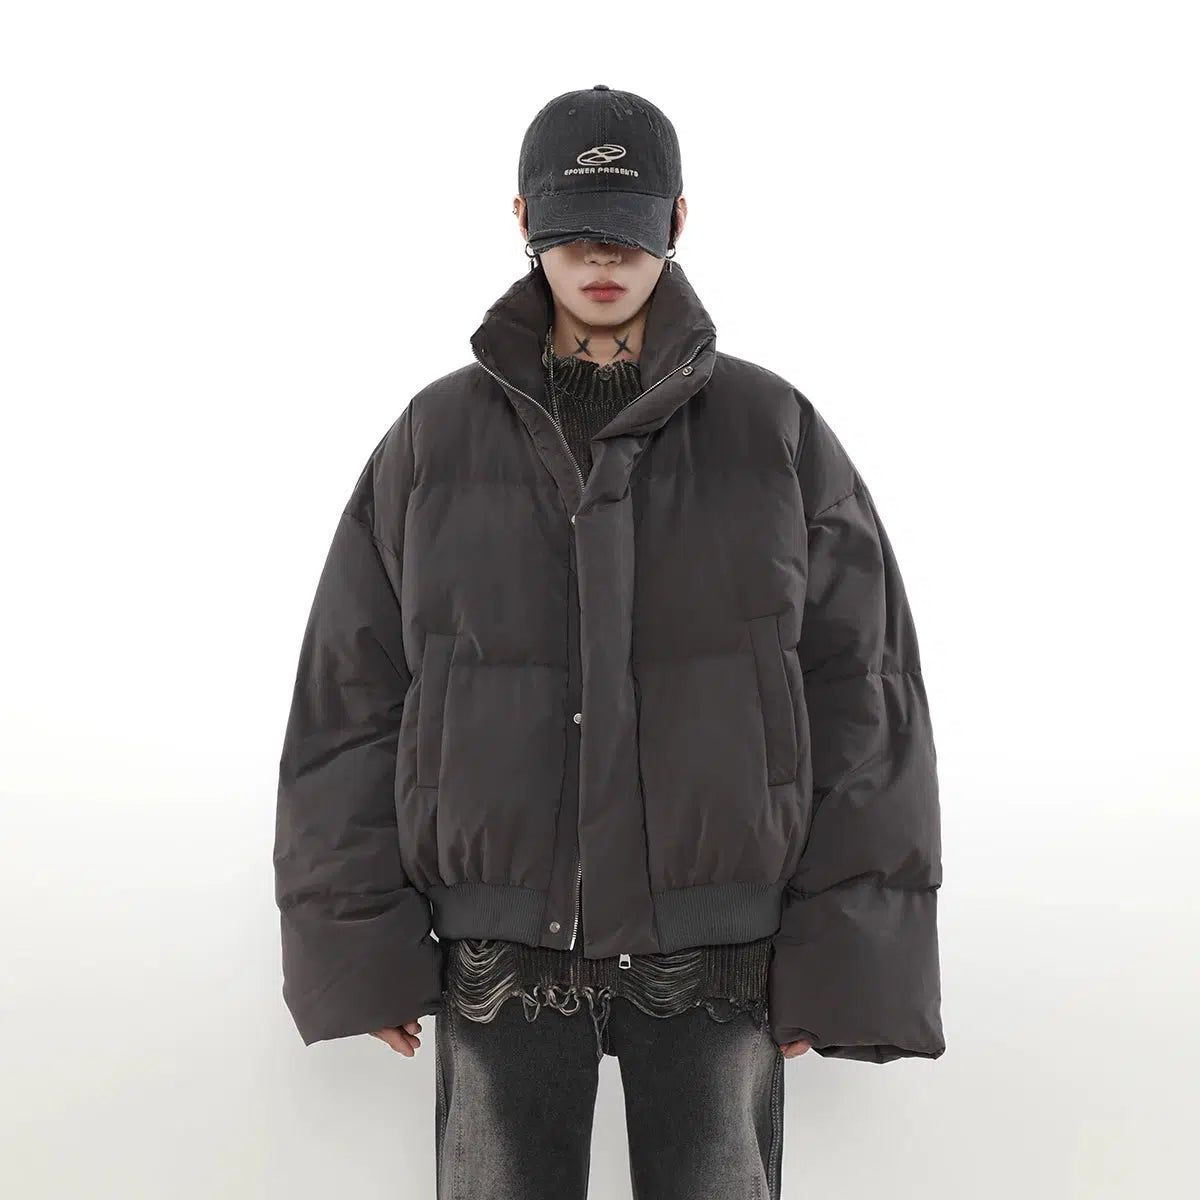 Versatile Thick Puffer Jacket Korean Street Fashion Jacket By Mr Nearly Shop Online at OH Vault